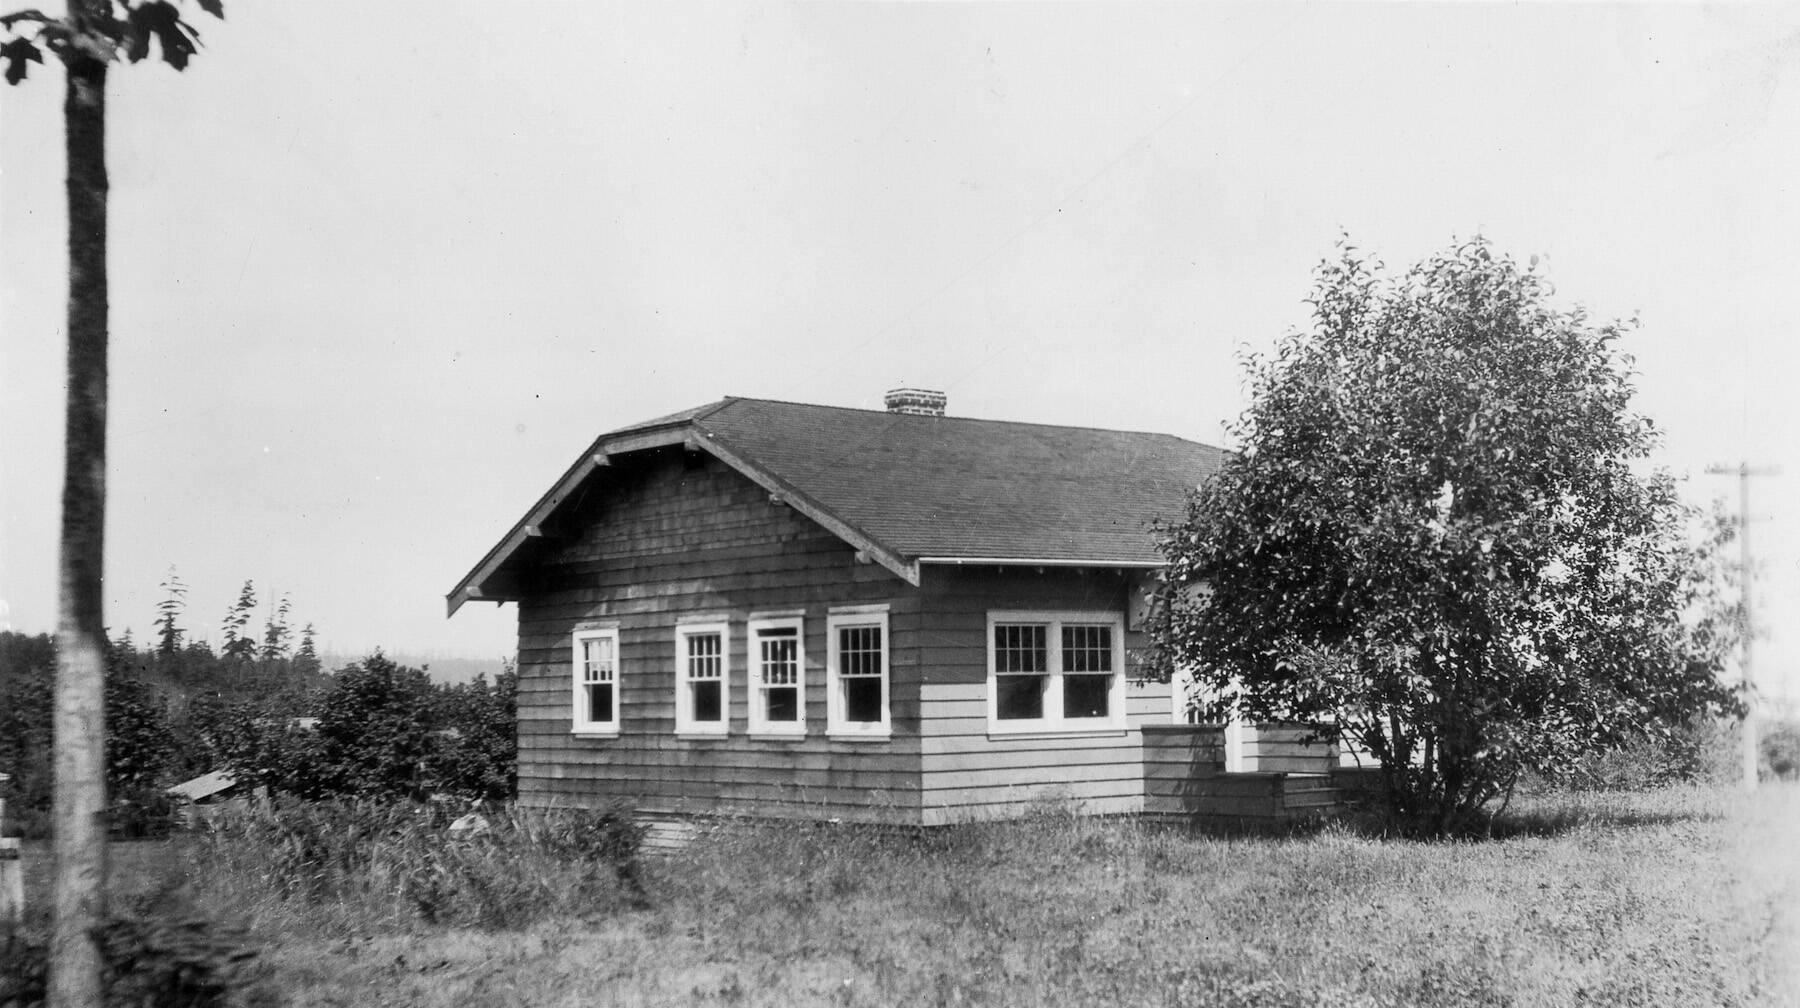 Photo provided
The Langley Library is pictured in 1924.